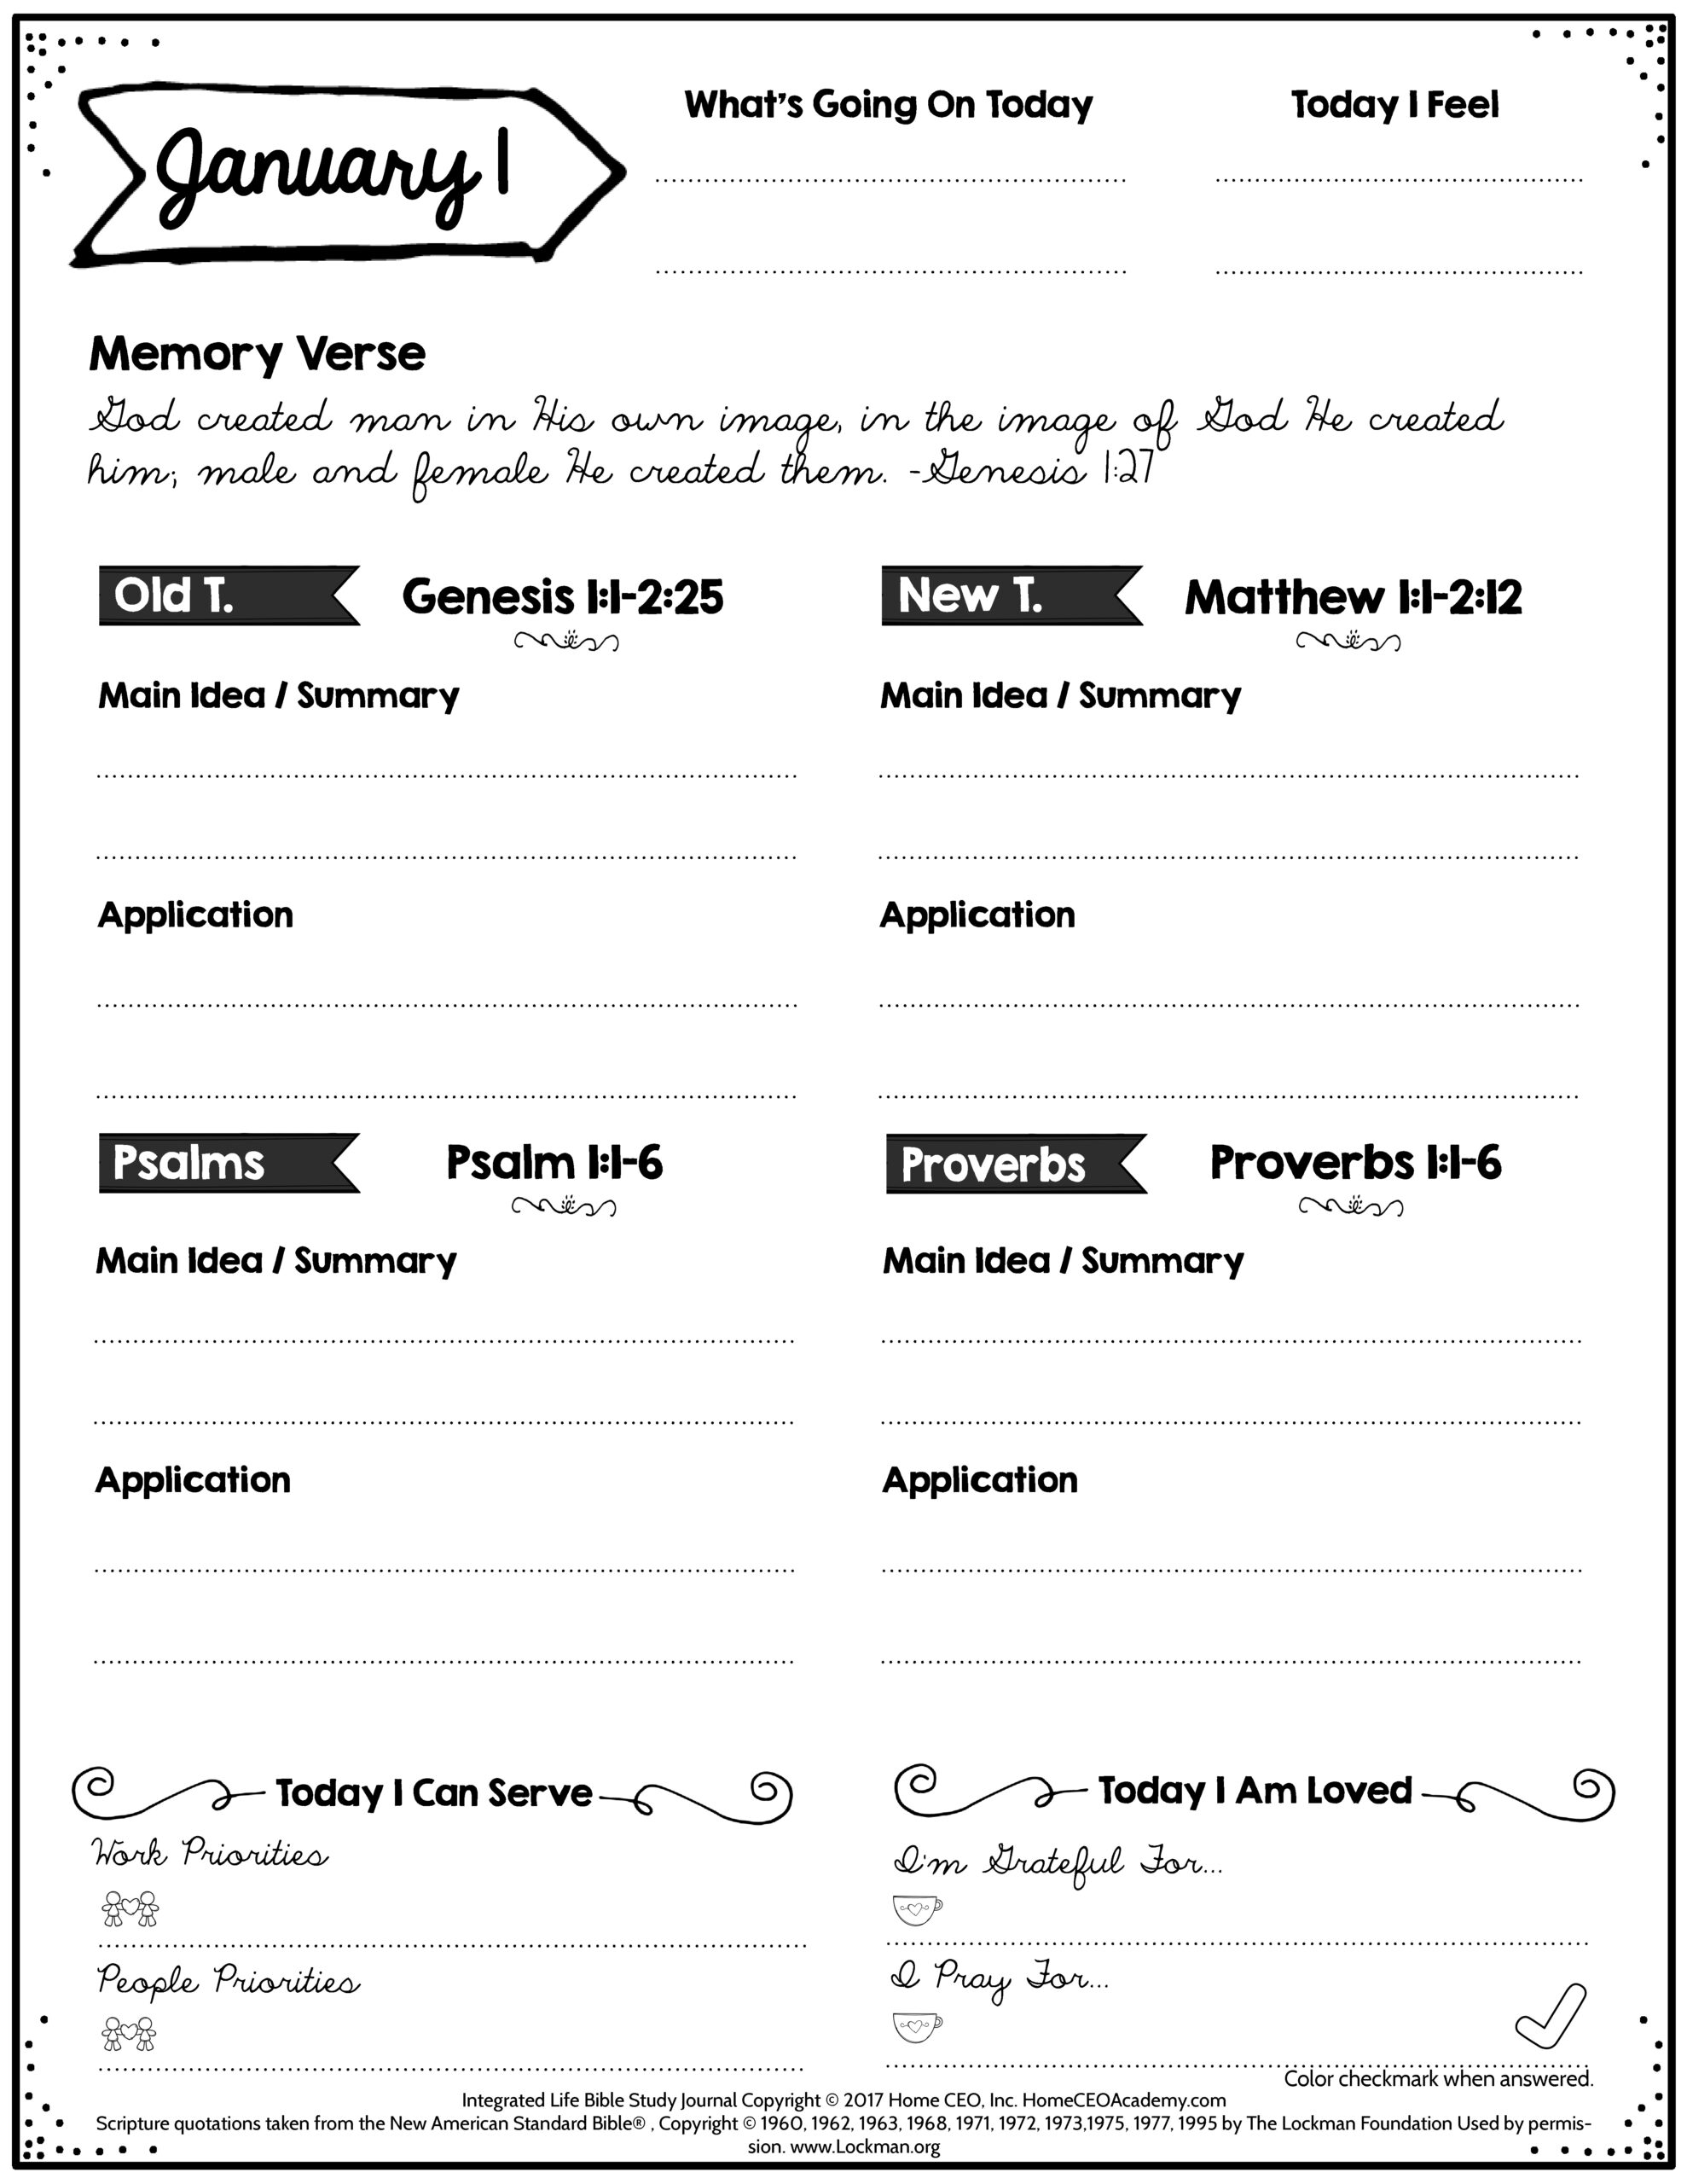 Free Bible Study Printables intended for Free Printable Bible Studies For Women